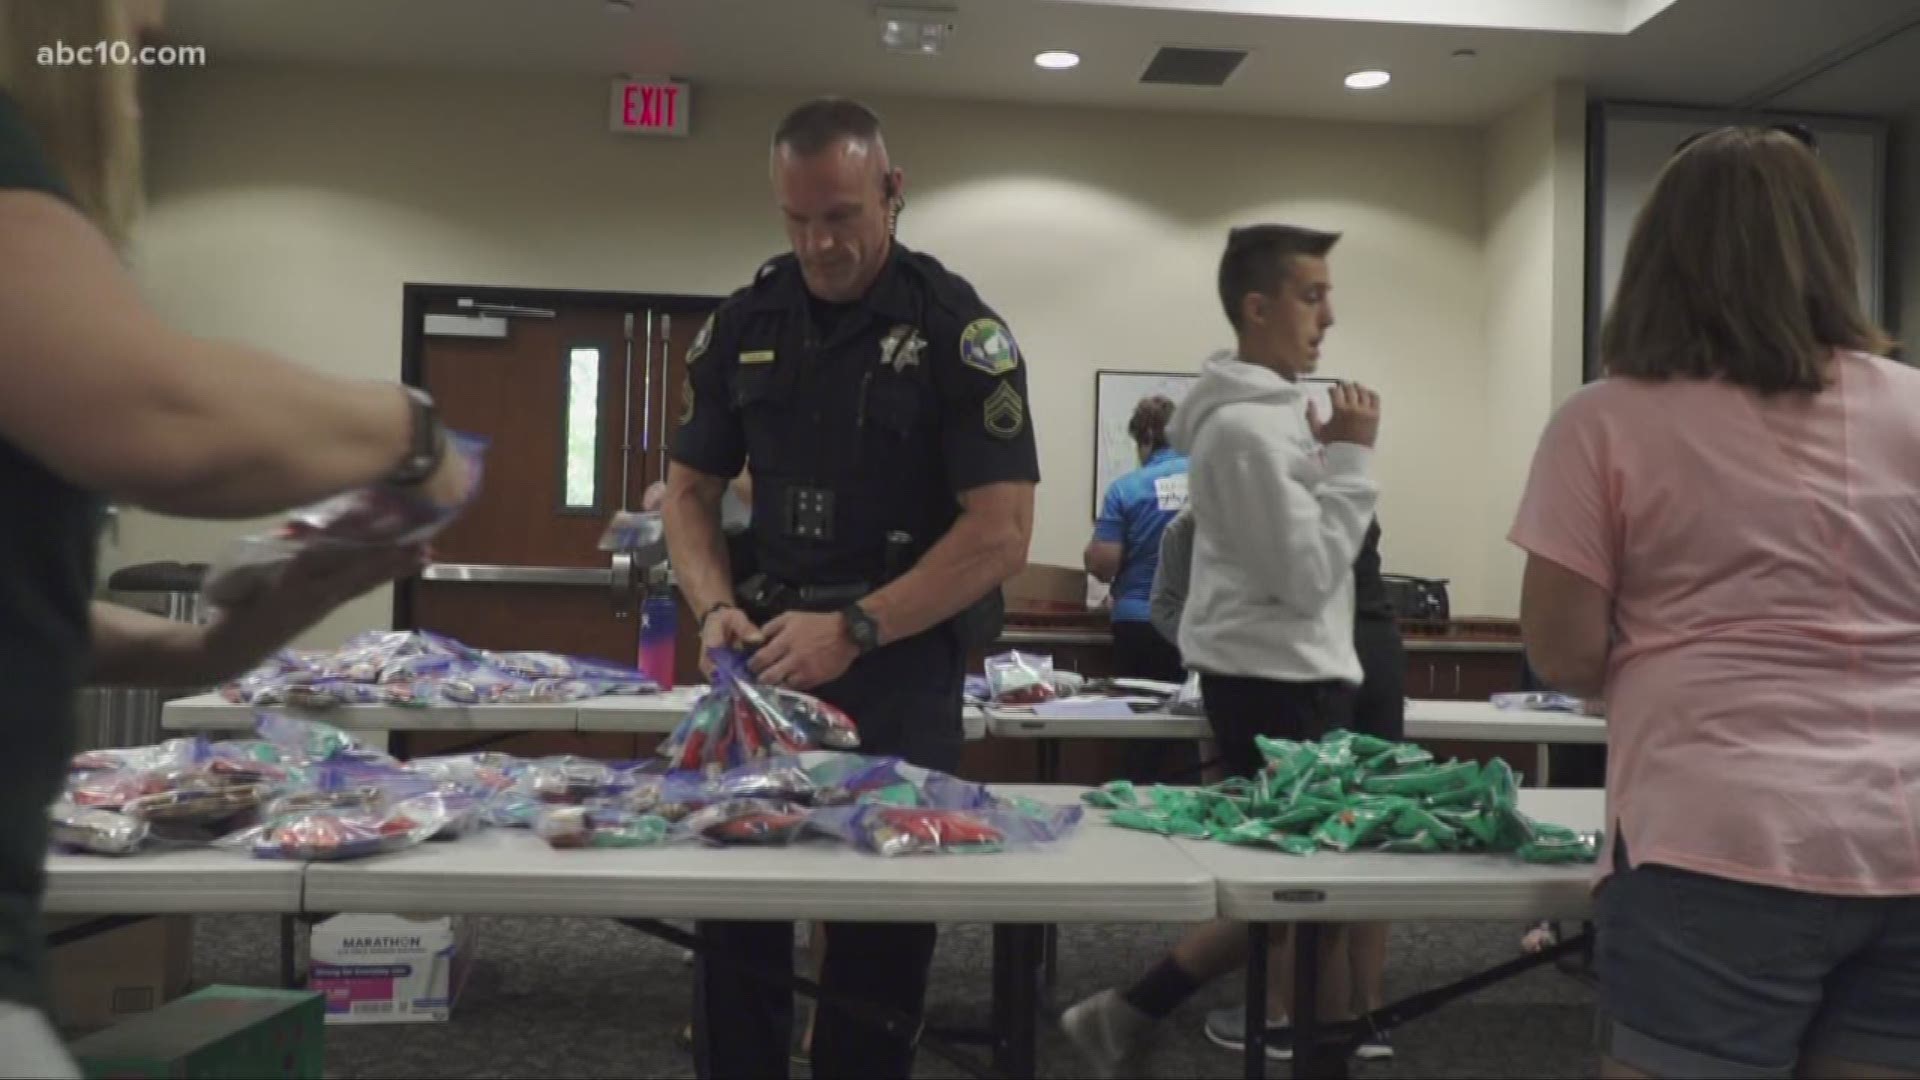 Ahead of Deputy Mark Stasyuk's memorial service, volunteers with the End of Watch Fund packed the City Council Chambers in Elk Grove to organize snack bags and thousands of letters for officers who will attend on Saturday.